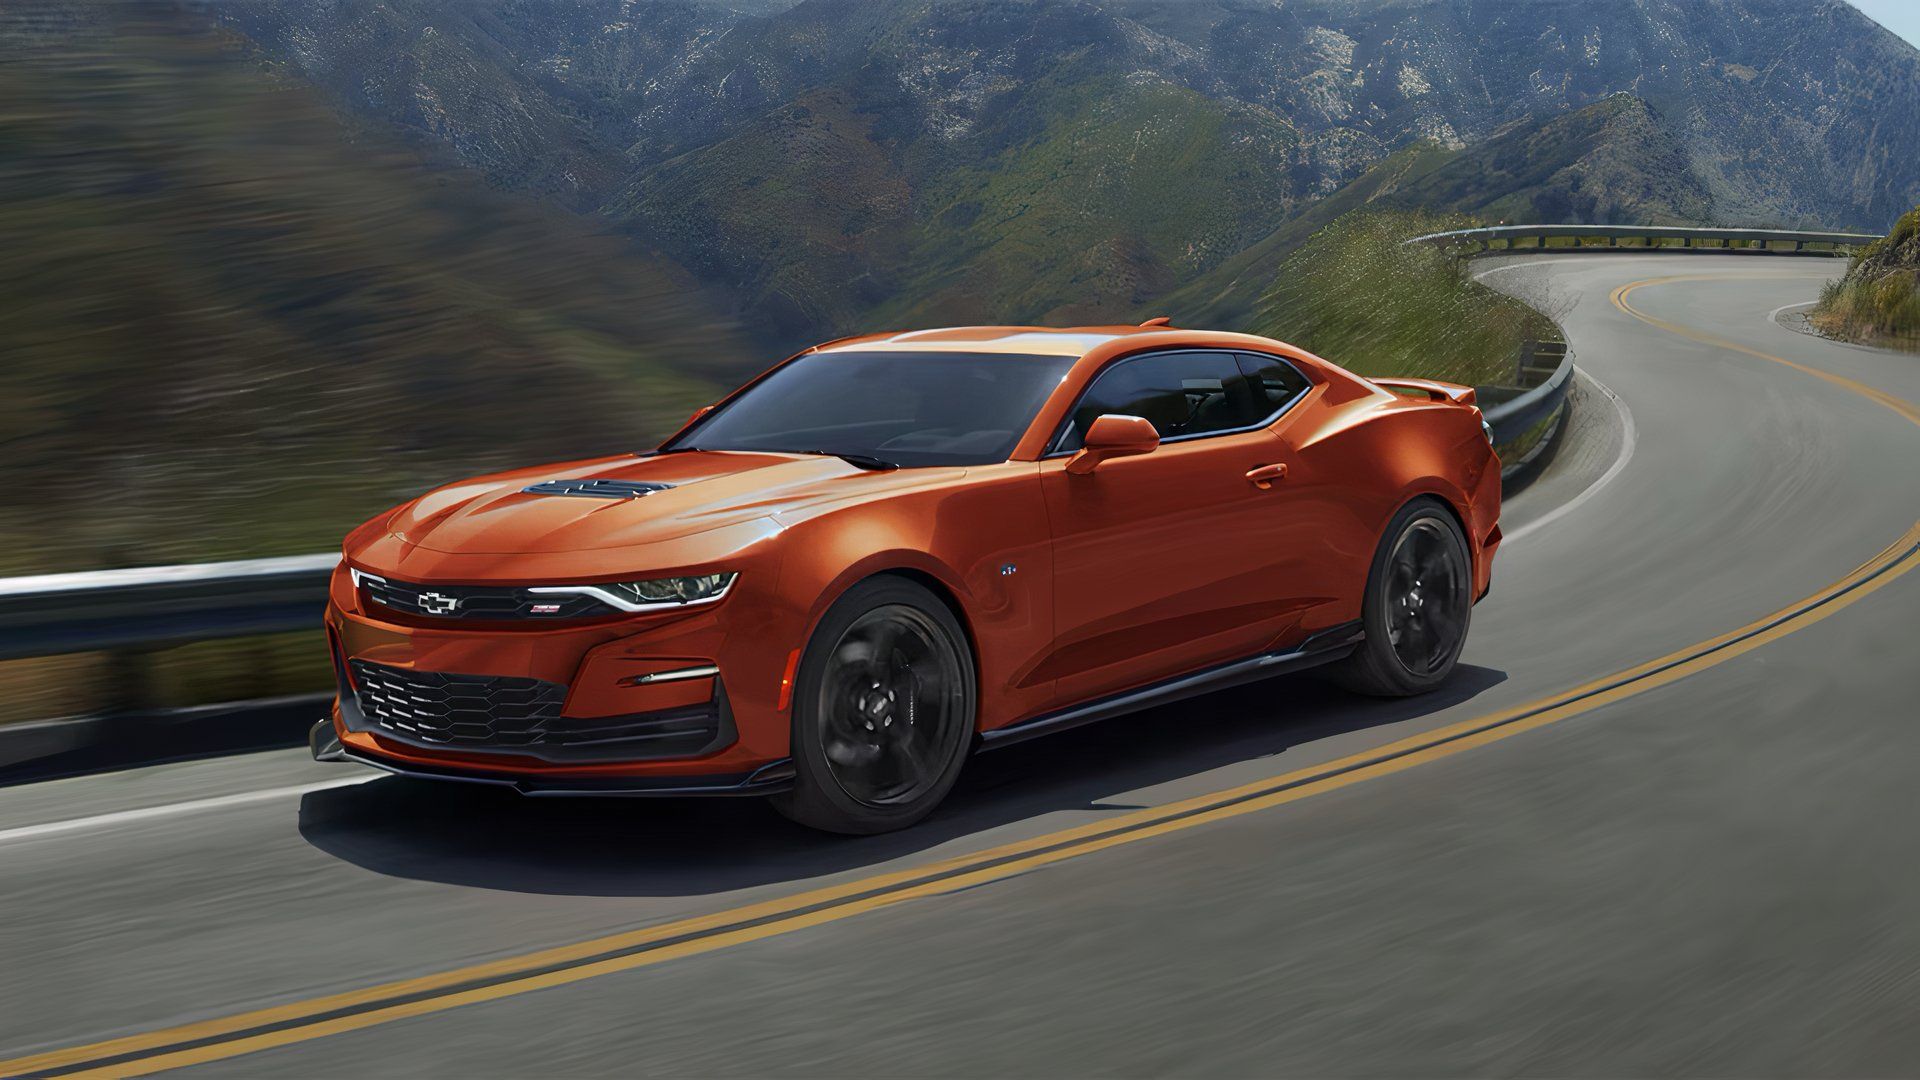 2024 Chevrolet Camaro LT1 in orange and black driving on a country road